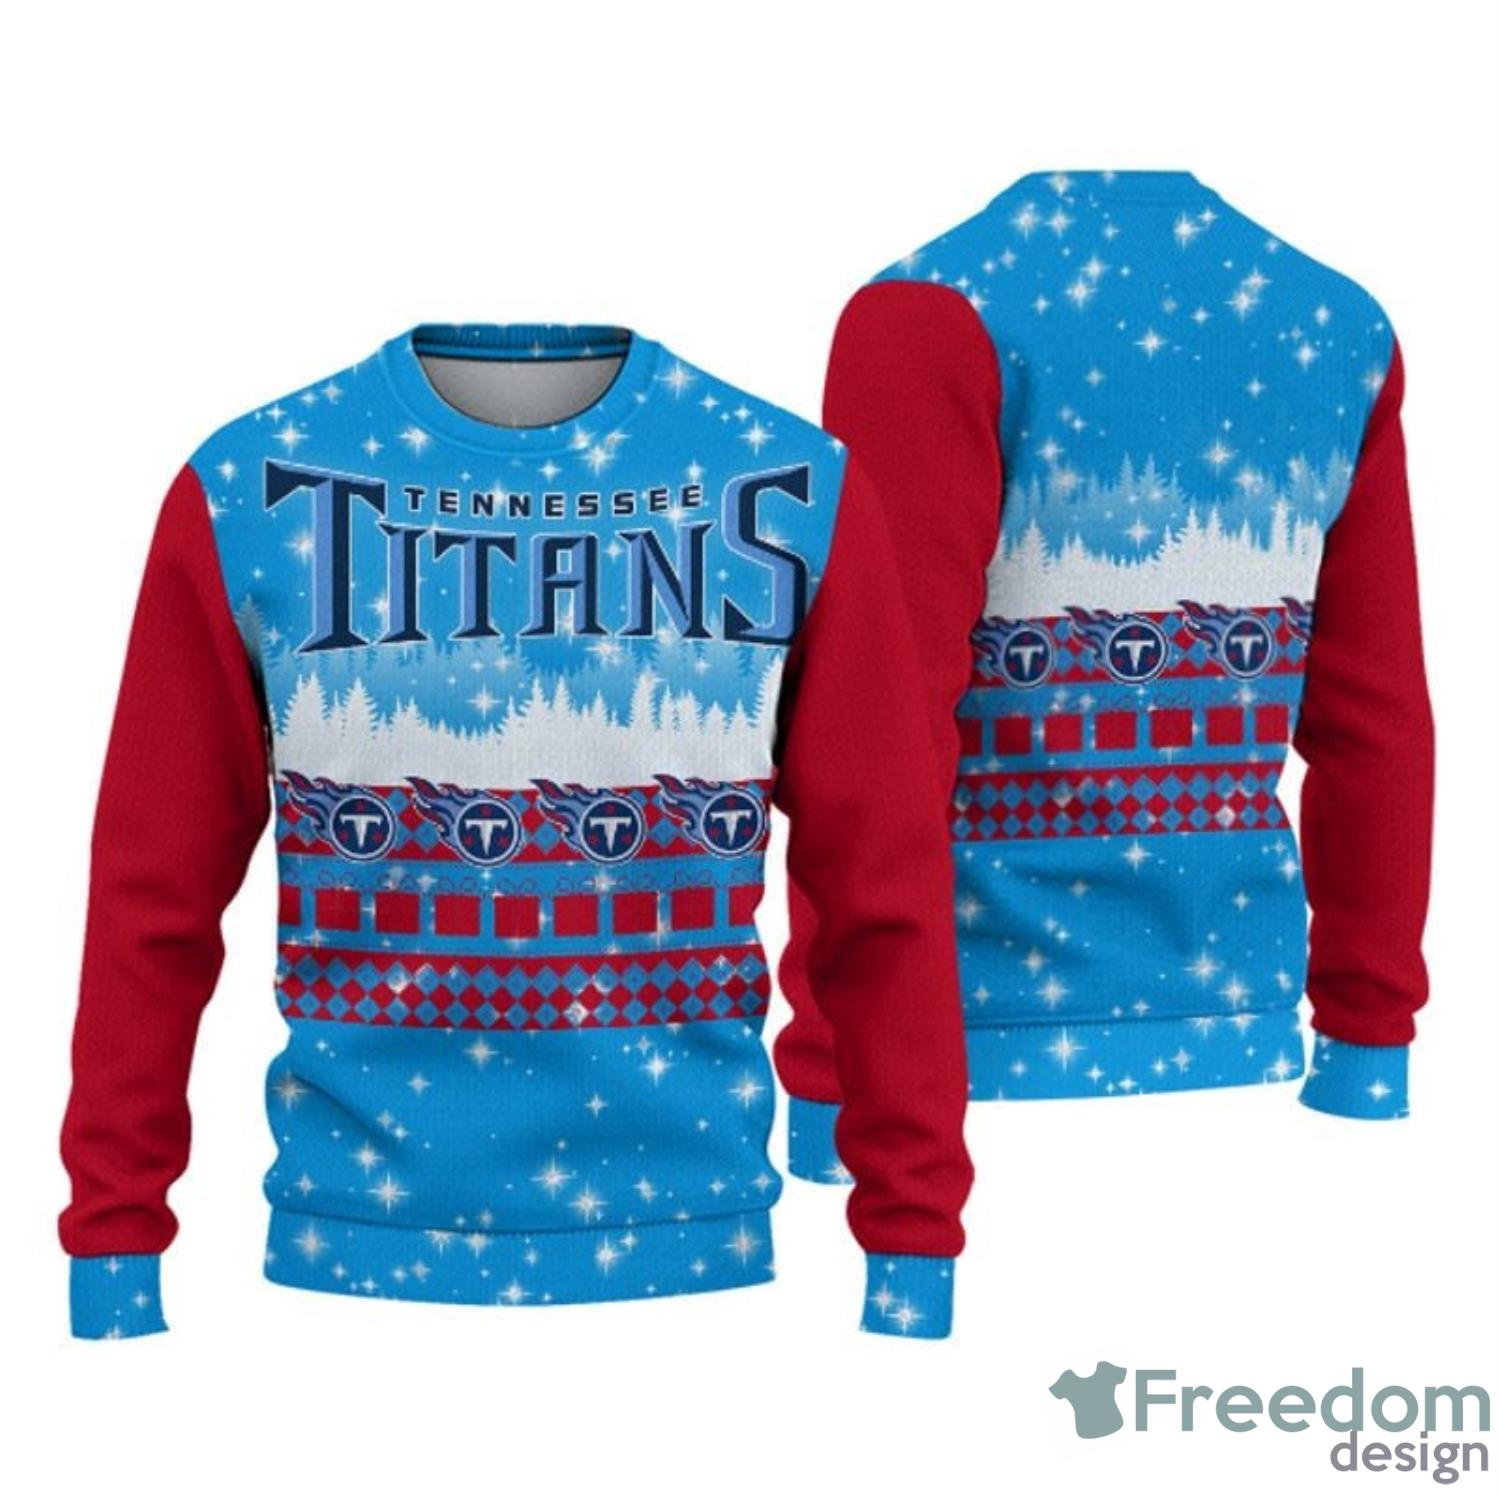 Toronto Maple Leafs Christmas Forrest Pattern Ugly Christmas Sweater -  Freedomdesign